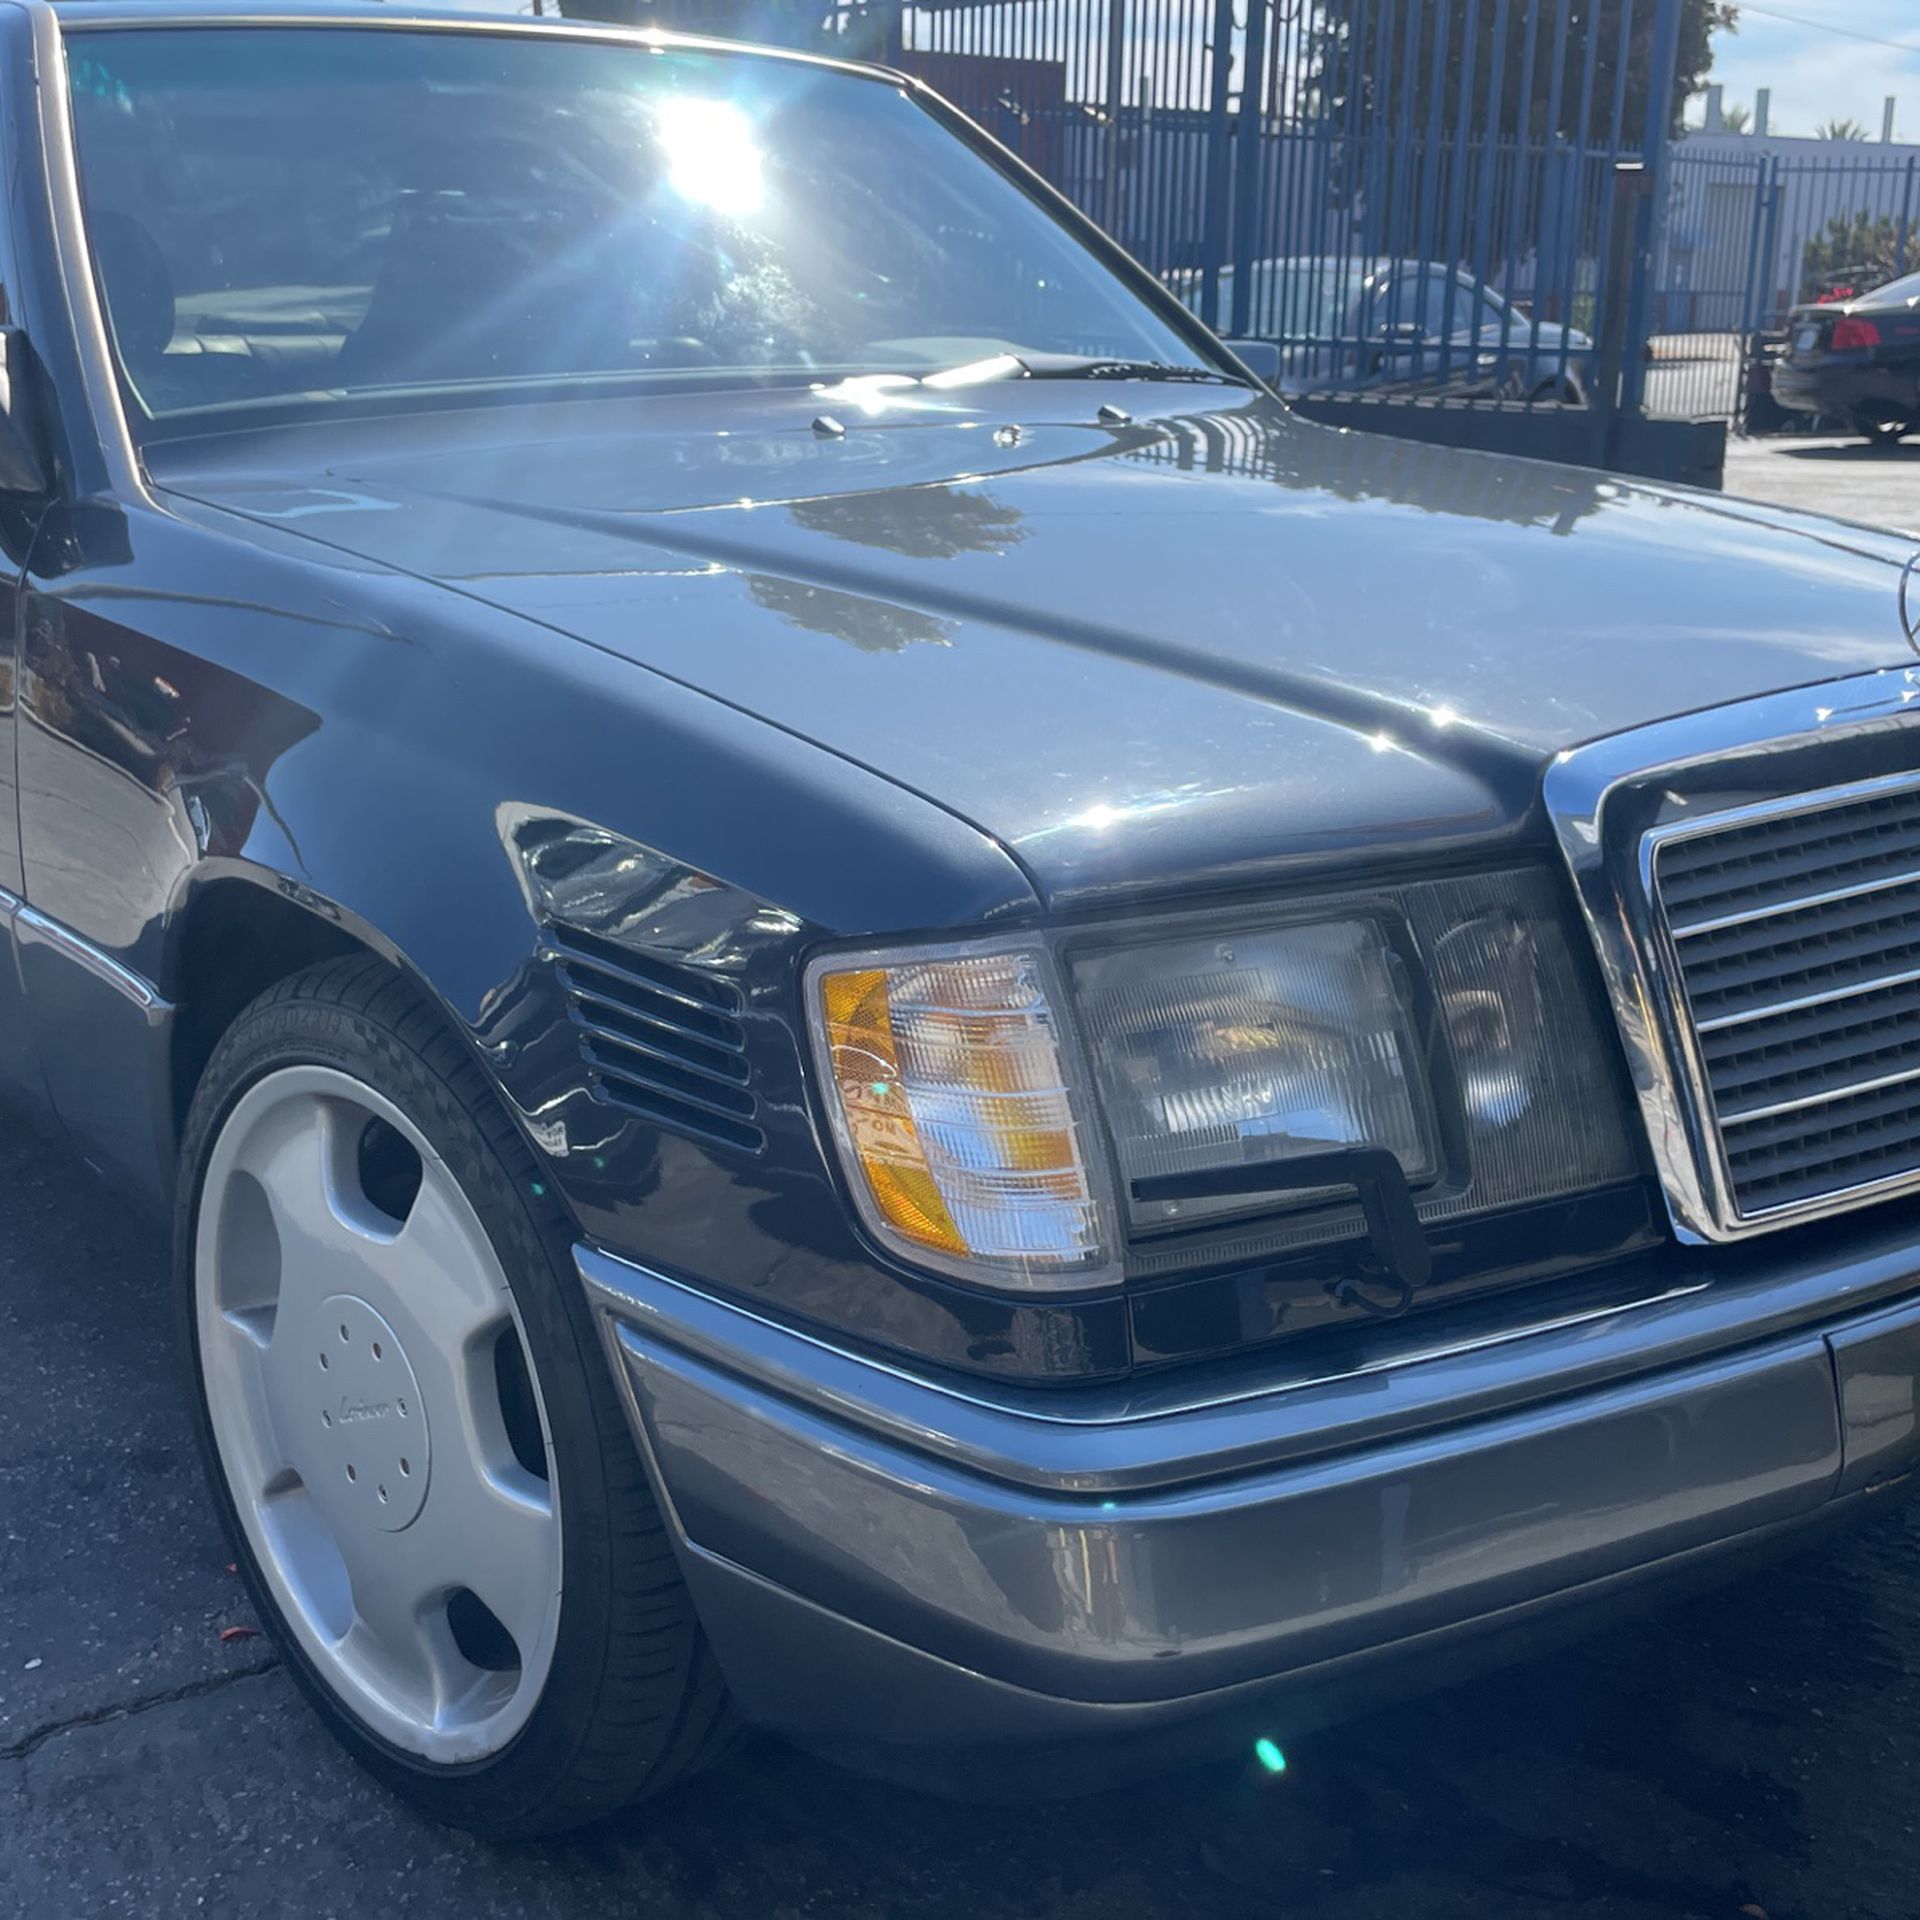 1995 Mercedes E300 Diesel  9500 OBO  Series Buyers Only